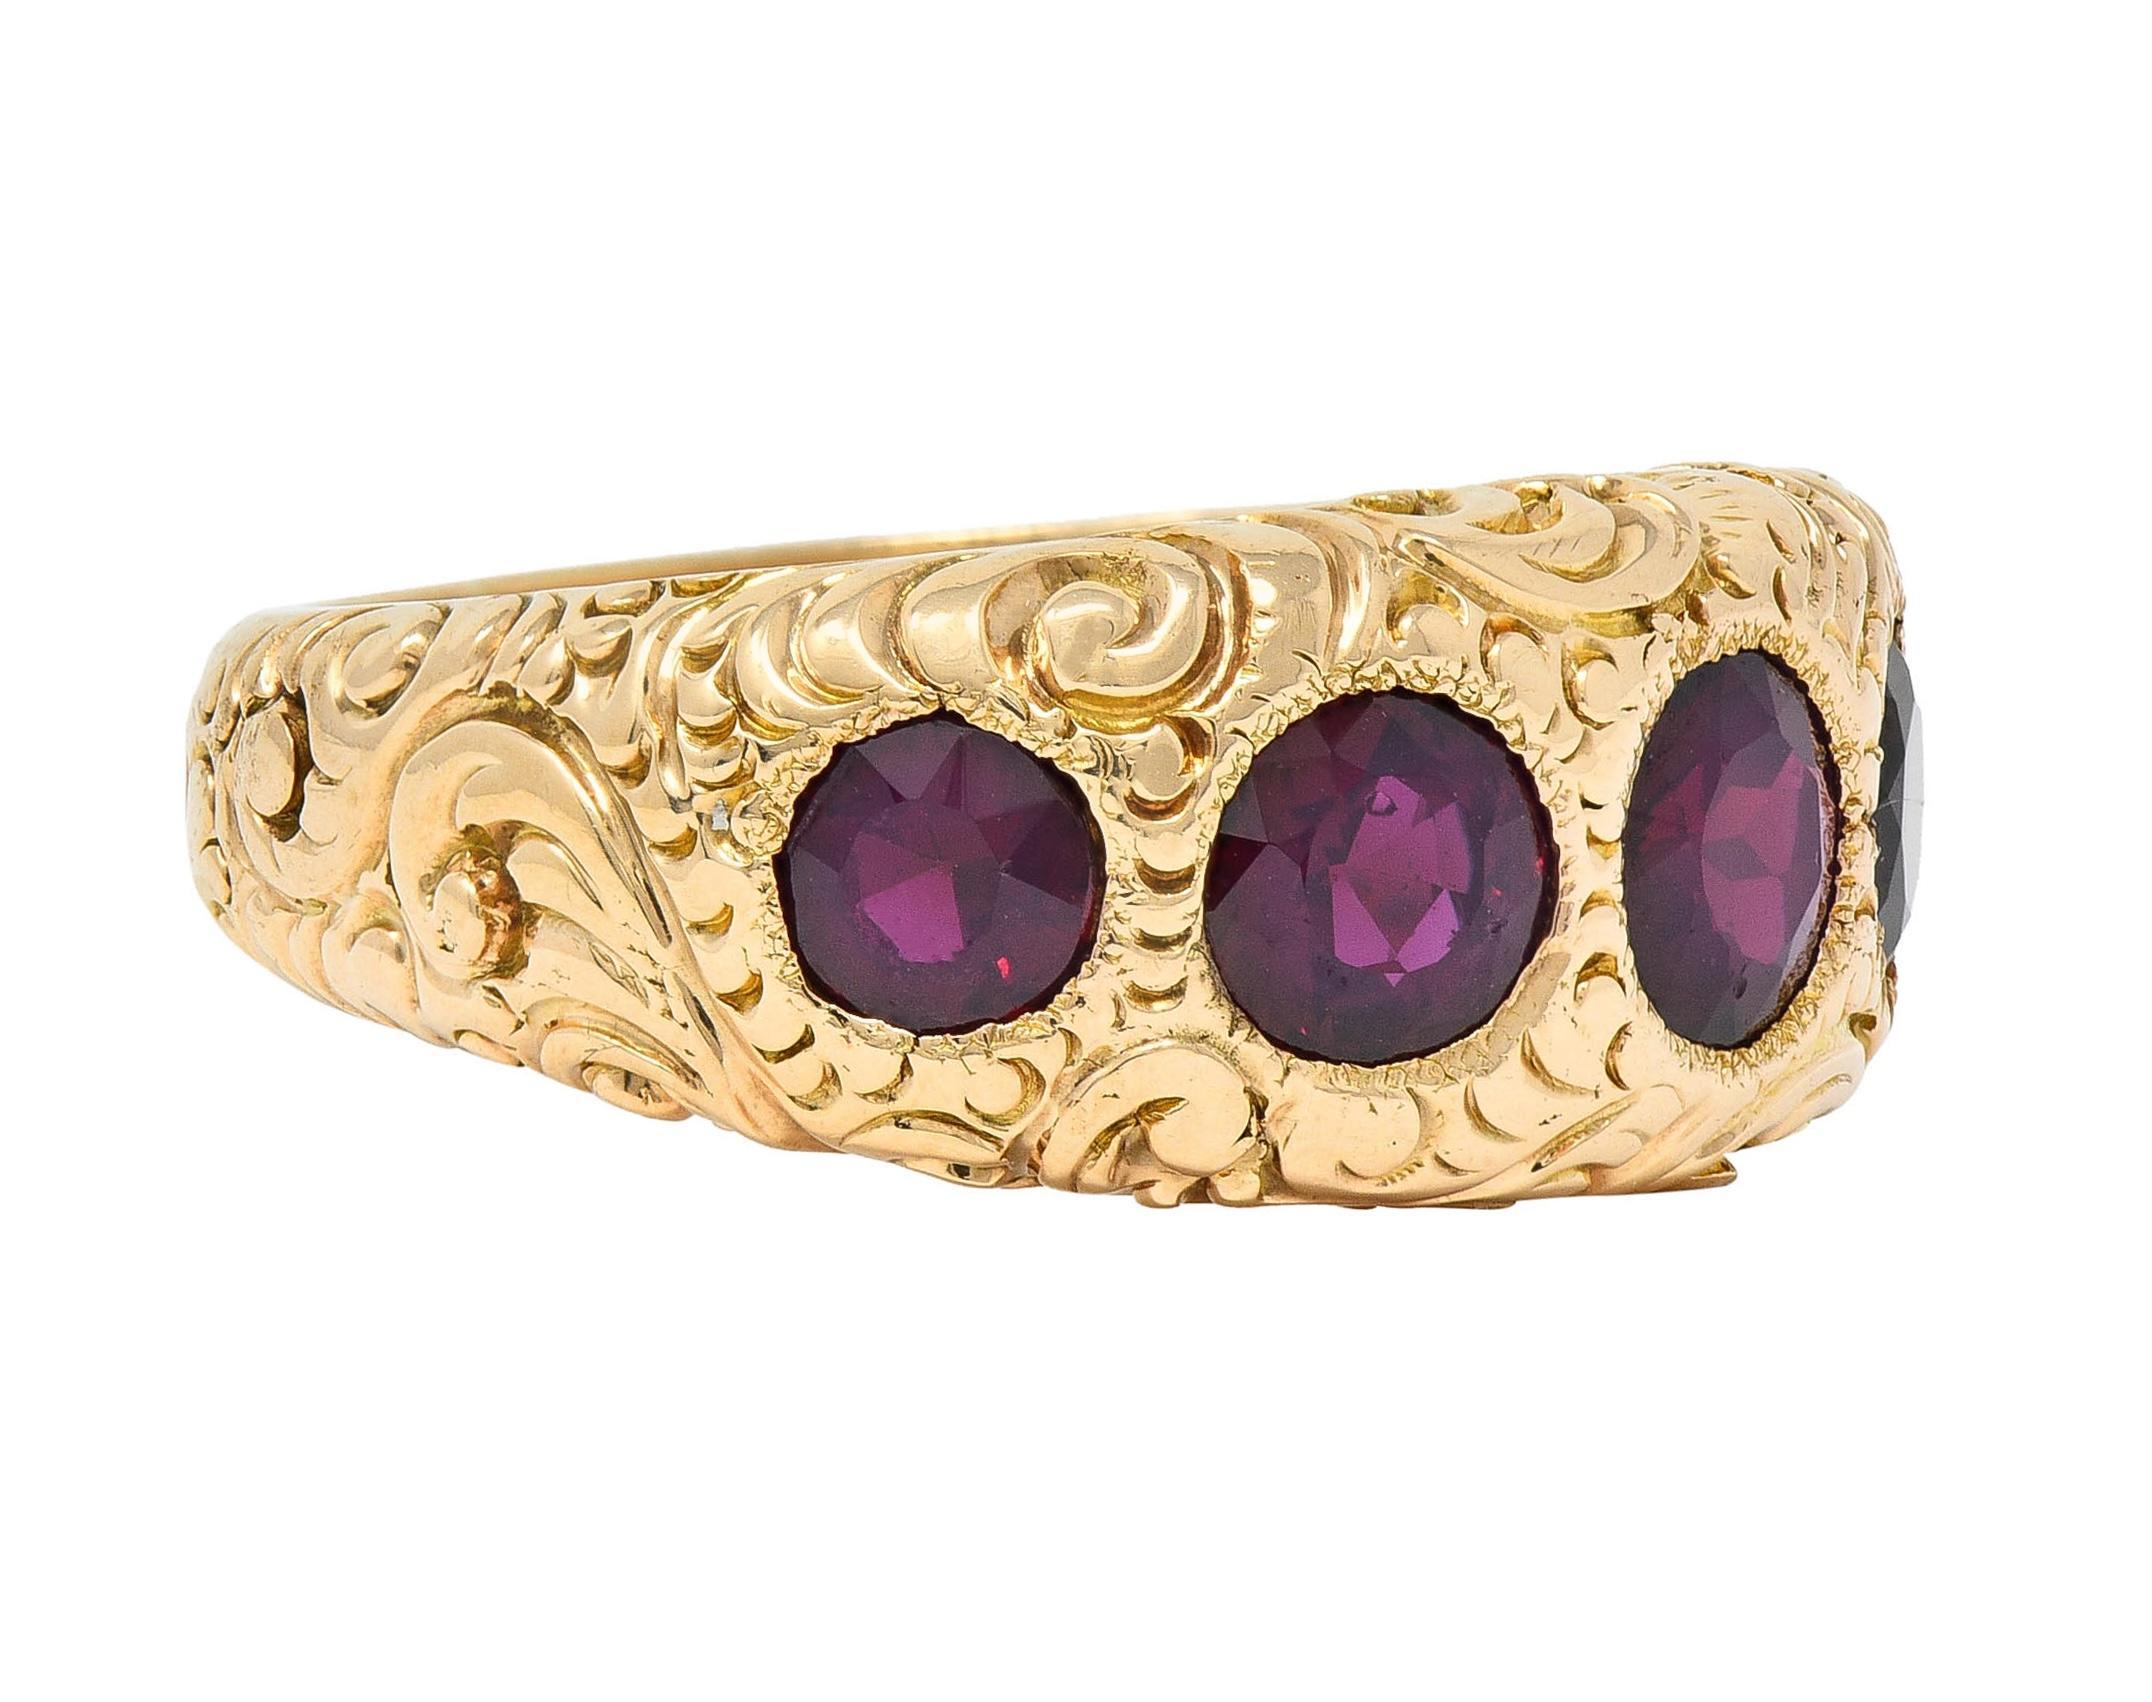 Centering five graduated round cut garnets flush set east to west
Transparent medium-dark red to orangey-red in color 
Weighing approximately 3.44 carats total 
With an engraved scroll motif surround 
Stamped for 14 karat gold
Circa: 1860s
Ring